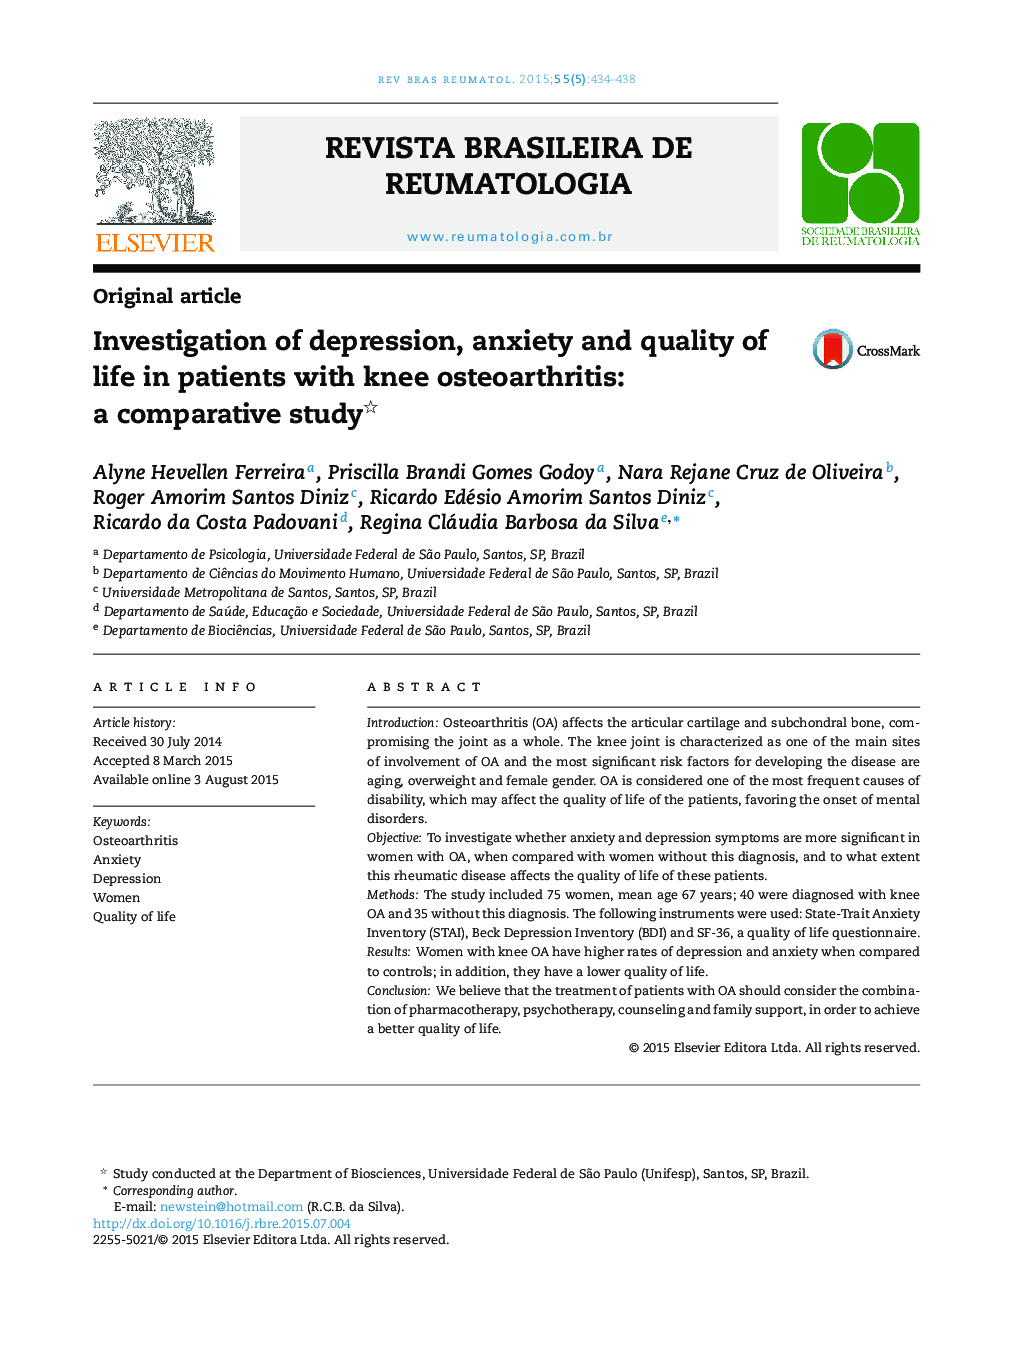 Investigation of depression, anxiety and quality of life in patients with knee osteoarthritis: a comparative study 